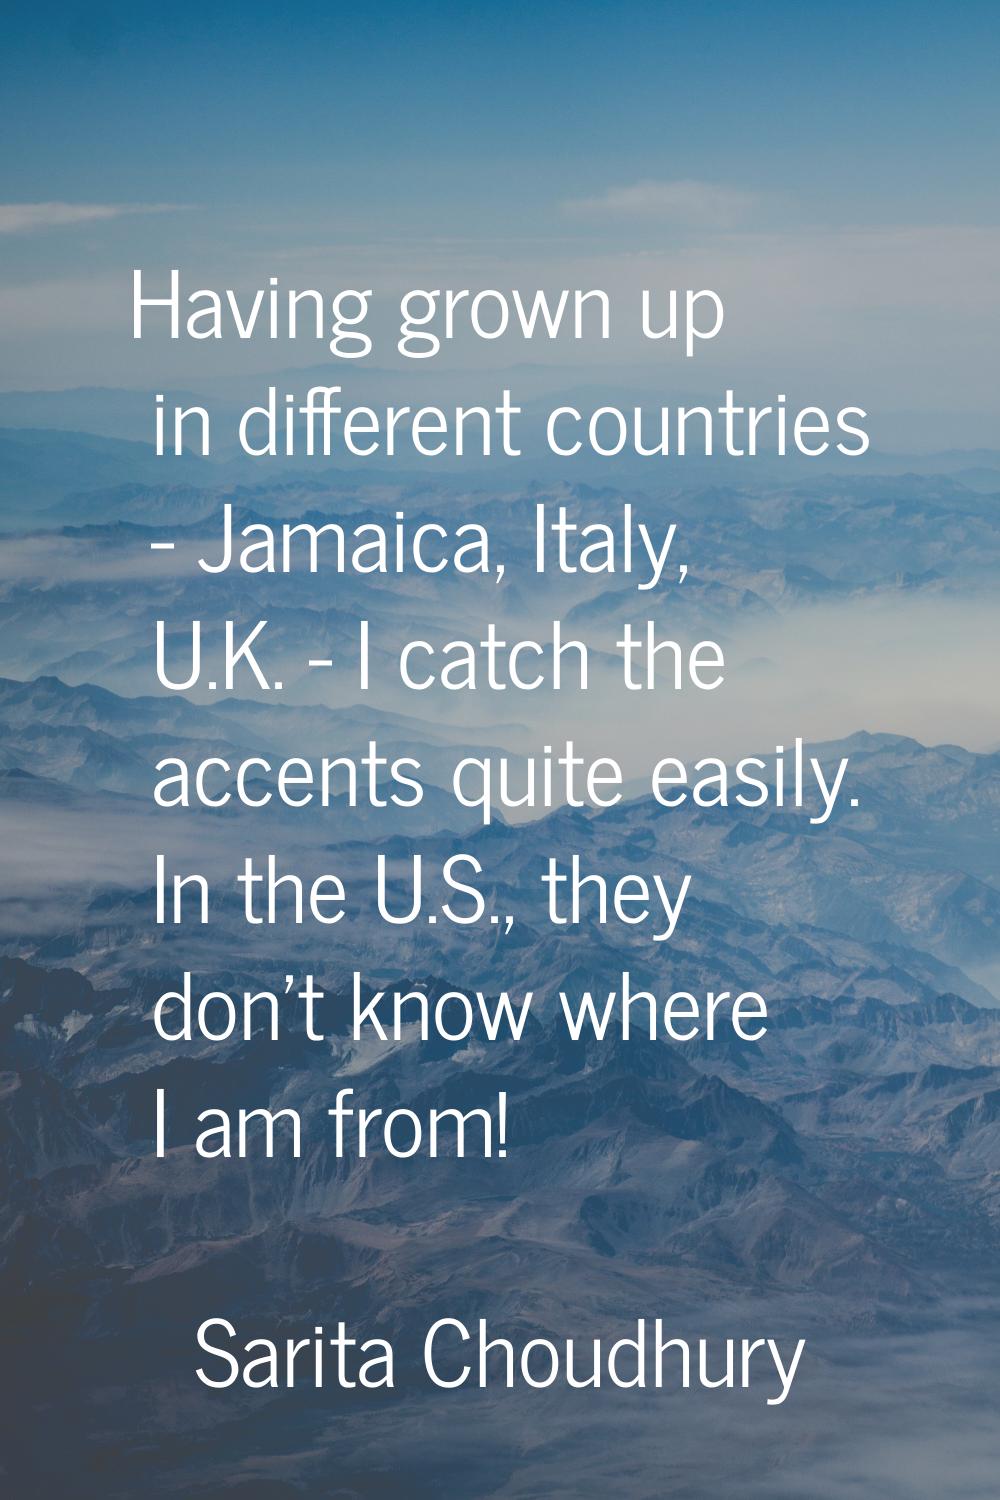 Having grown up in different countries - Jamaica, Italy, U.K. - I catch the accents quite easily. I